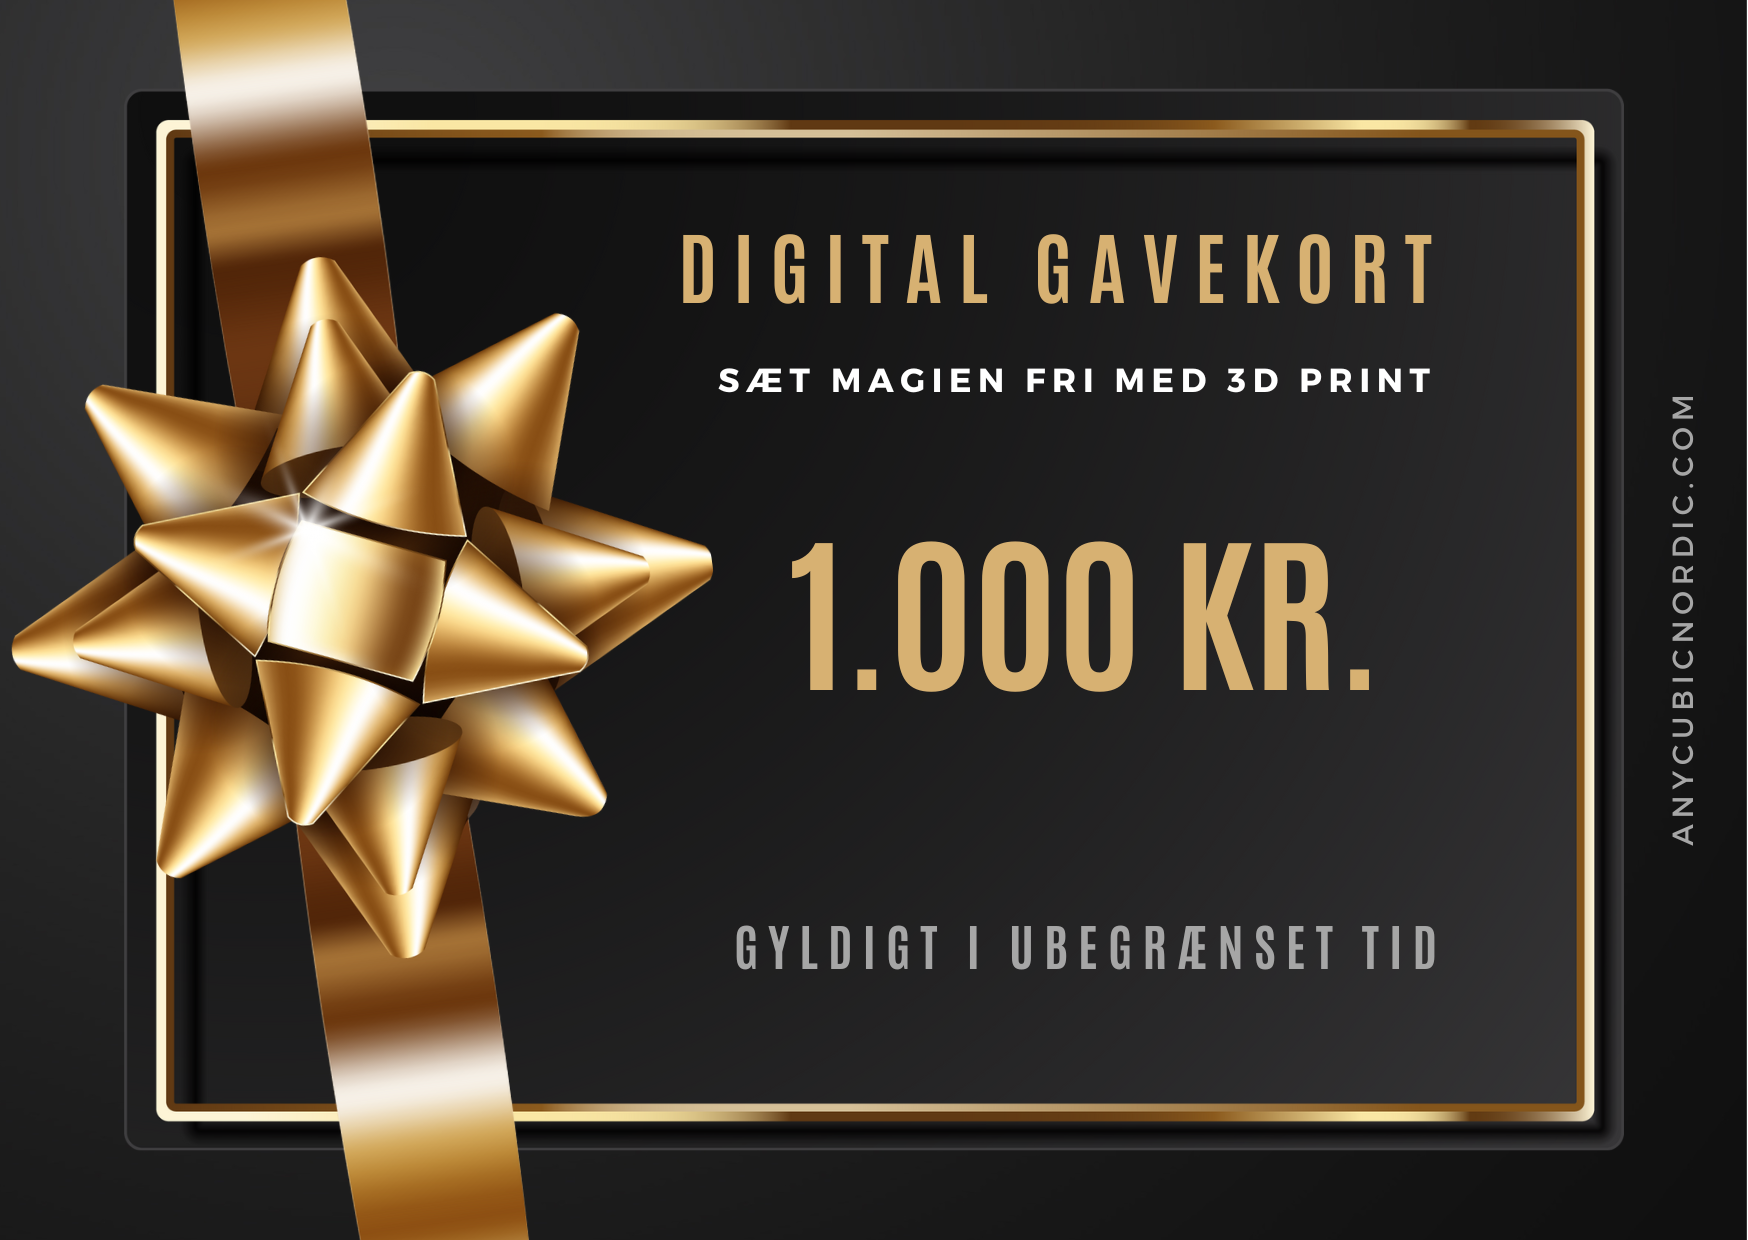 Anycubic.dk Giftcard